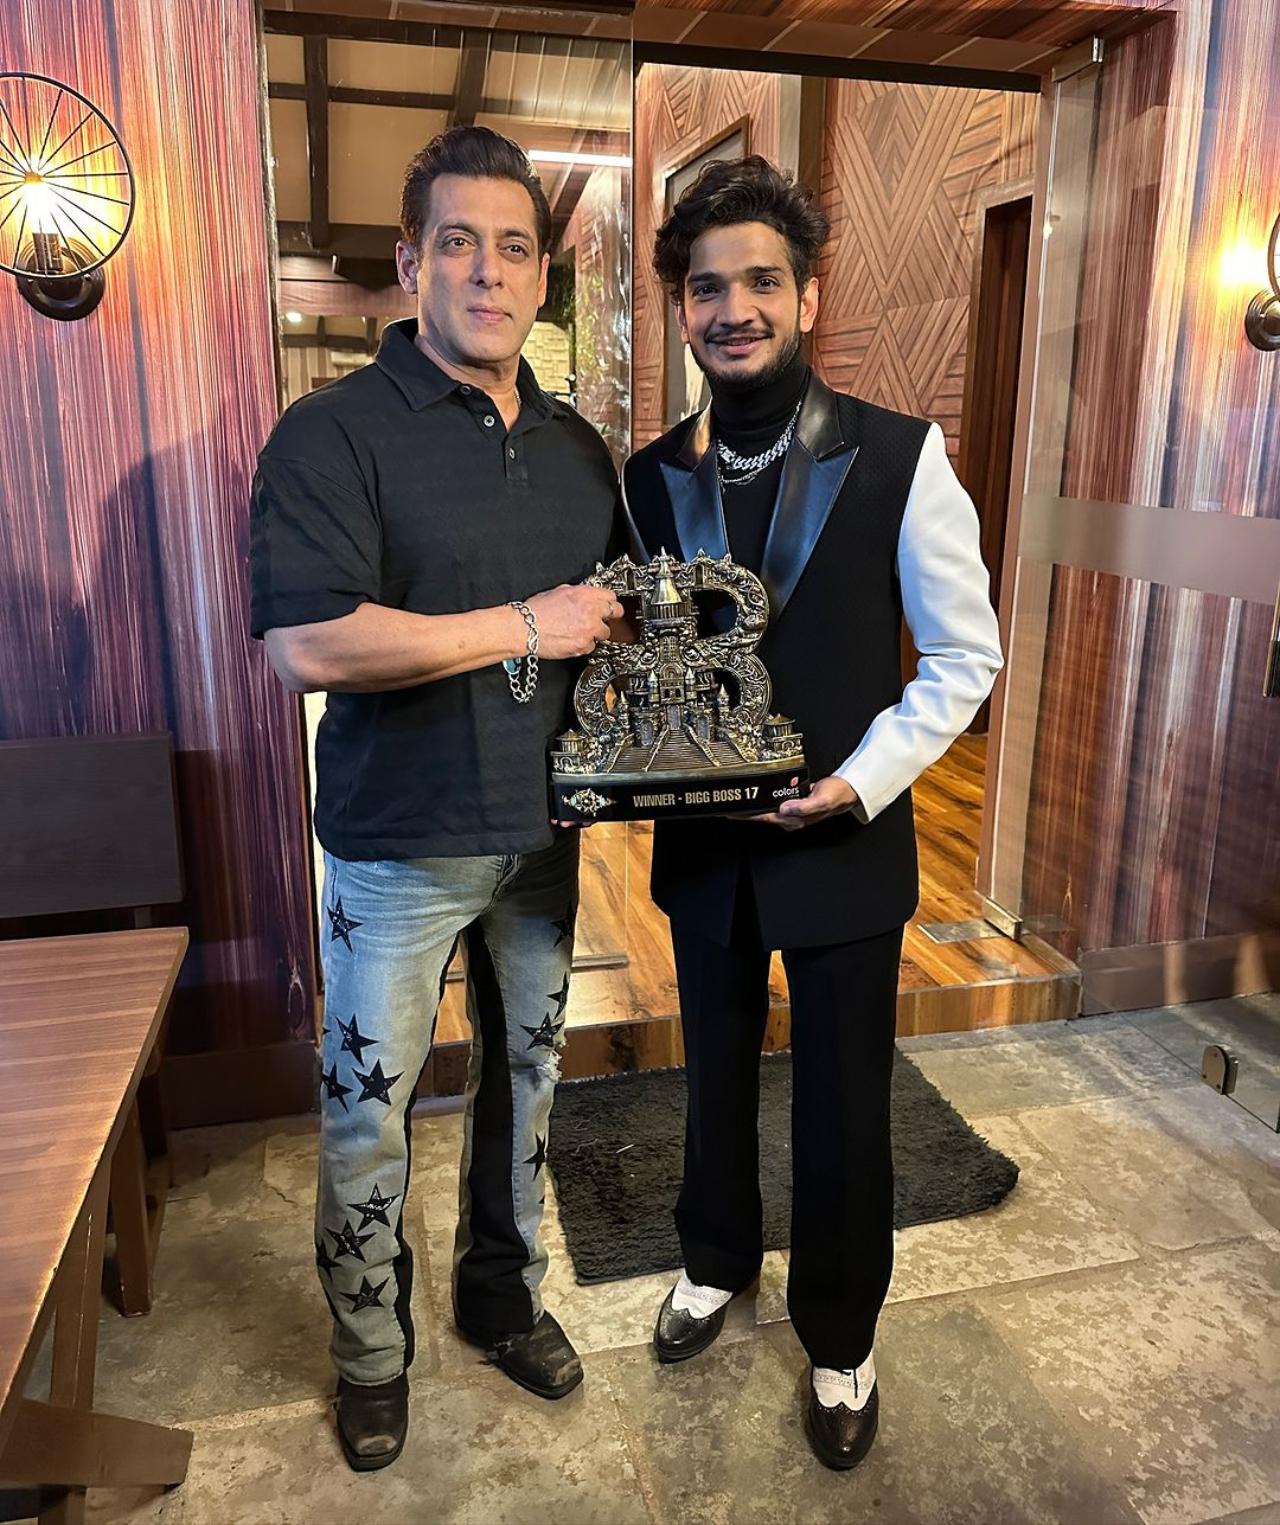 After winning the controversial reality show, he shared a picture of him holding the trophy with the show host Salman Khan. The comedian expressed his gratitude towards the Bollywood superstar for his guidance throughout the latest season. He also thanked his fans for their support